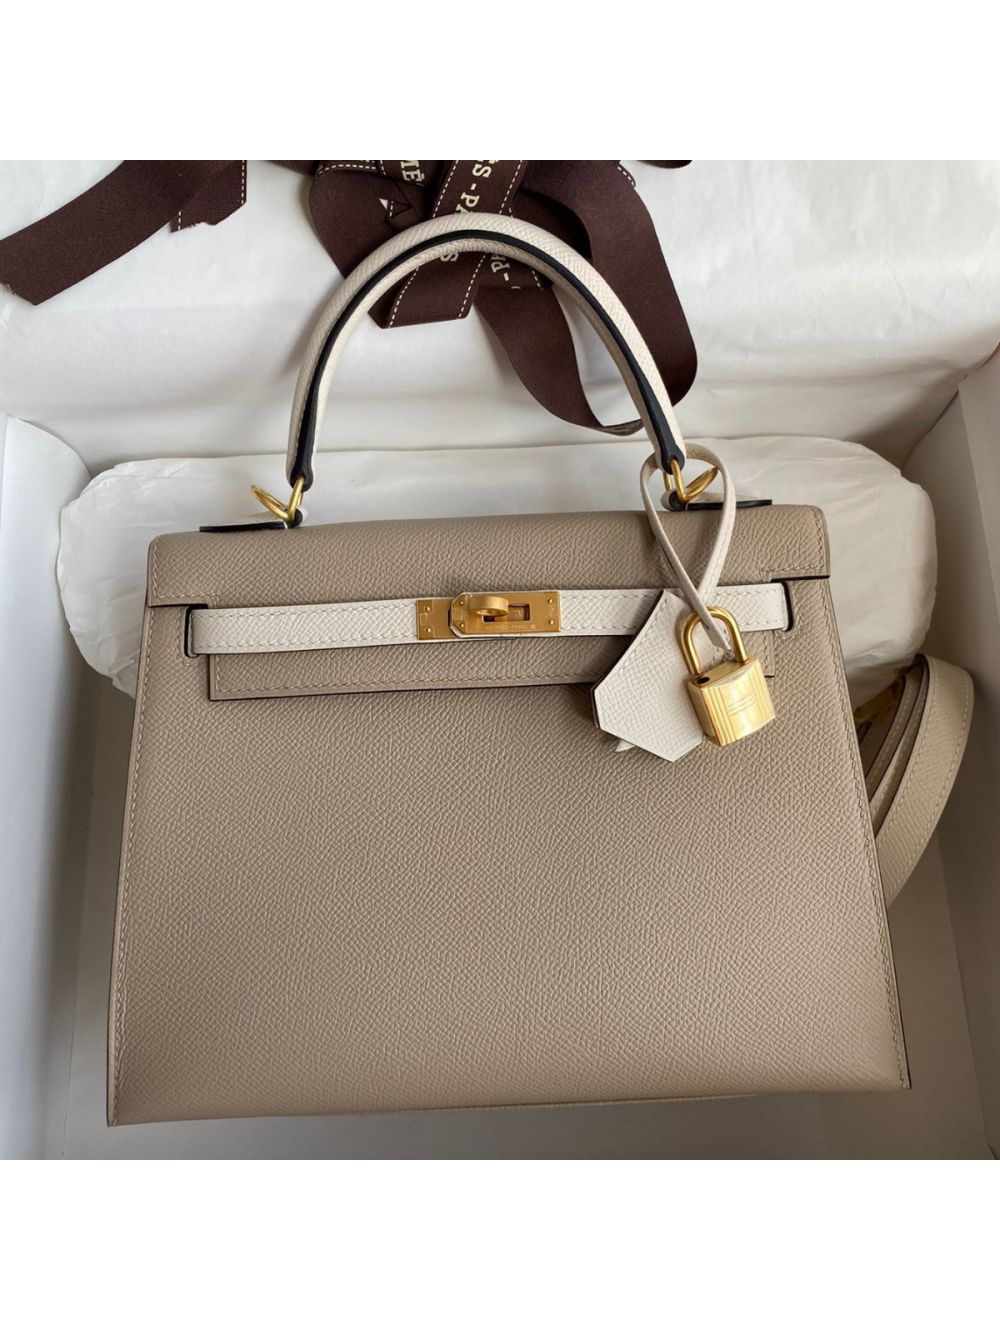 Replica Hermes Kelly Sellier 25 Bicolor Bag in Trench and Craie Epsom  Calfskin